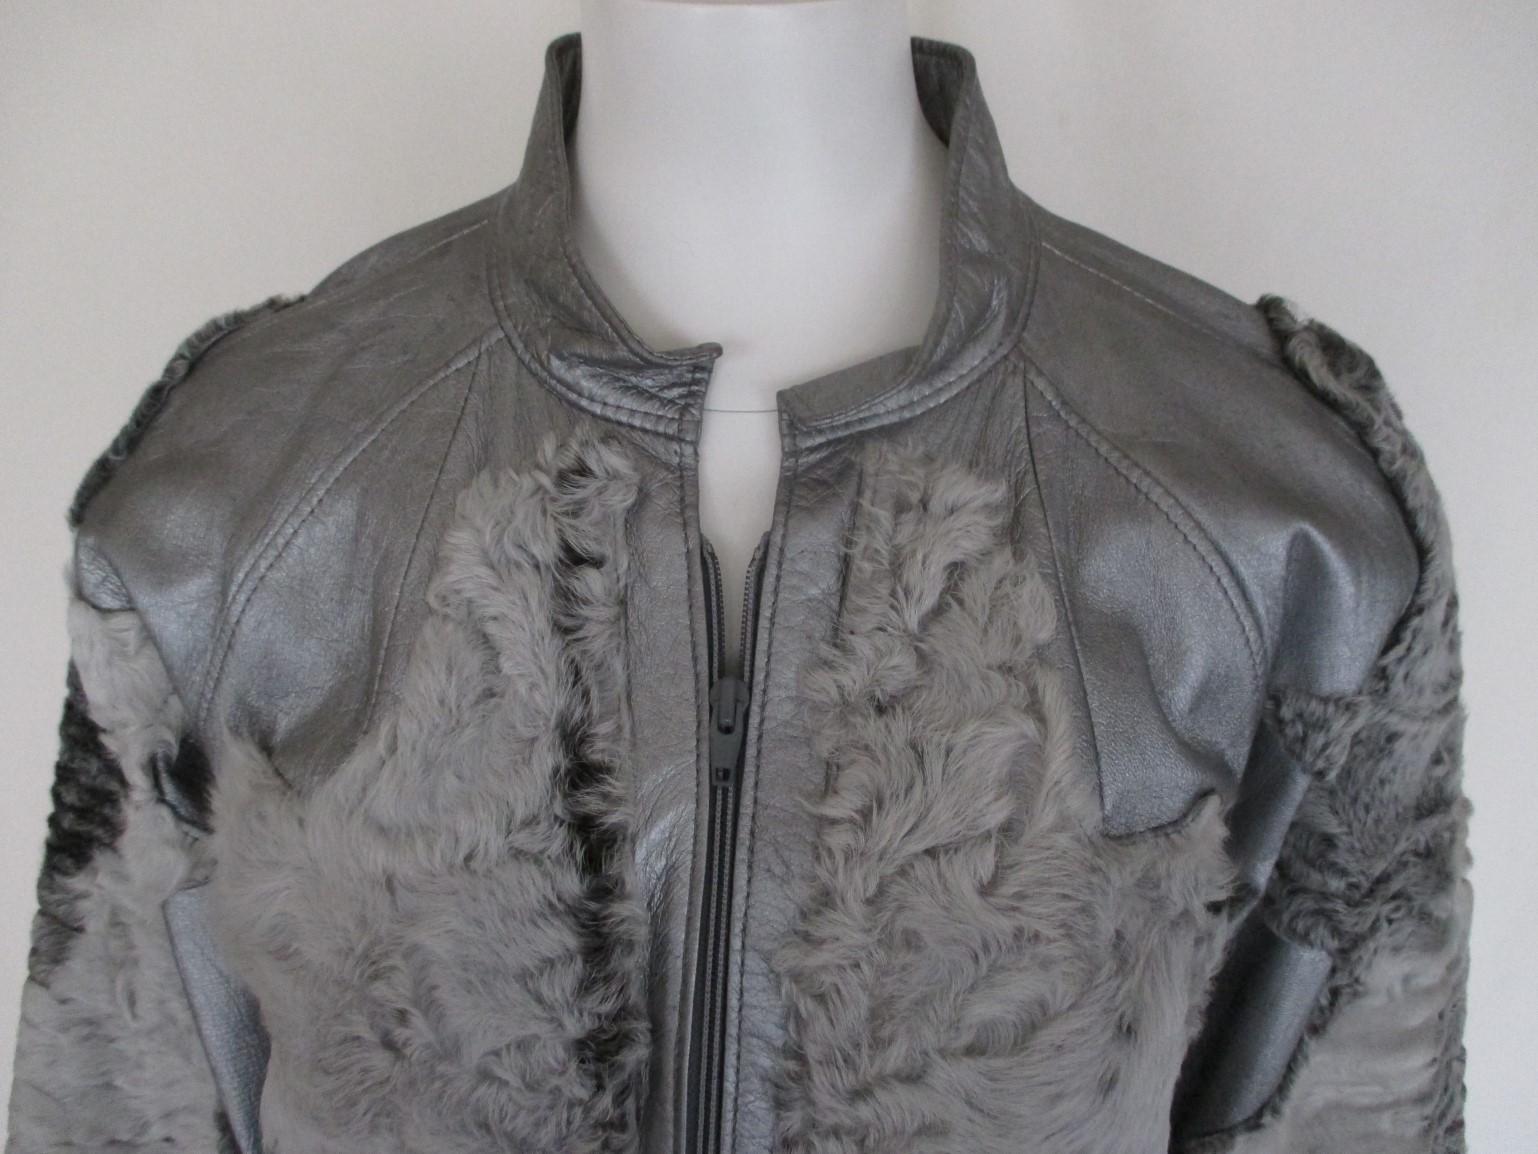 This vintage jacket is made from leather designed with persian Lamb fur.
Color: silver
in pre-owned condition, some little spots on the leather, see photos.
It has 2 pockets and a zipper.
size is about small to medium
Please note that vintage items